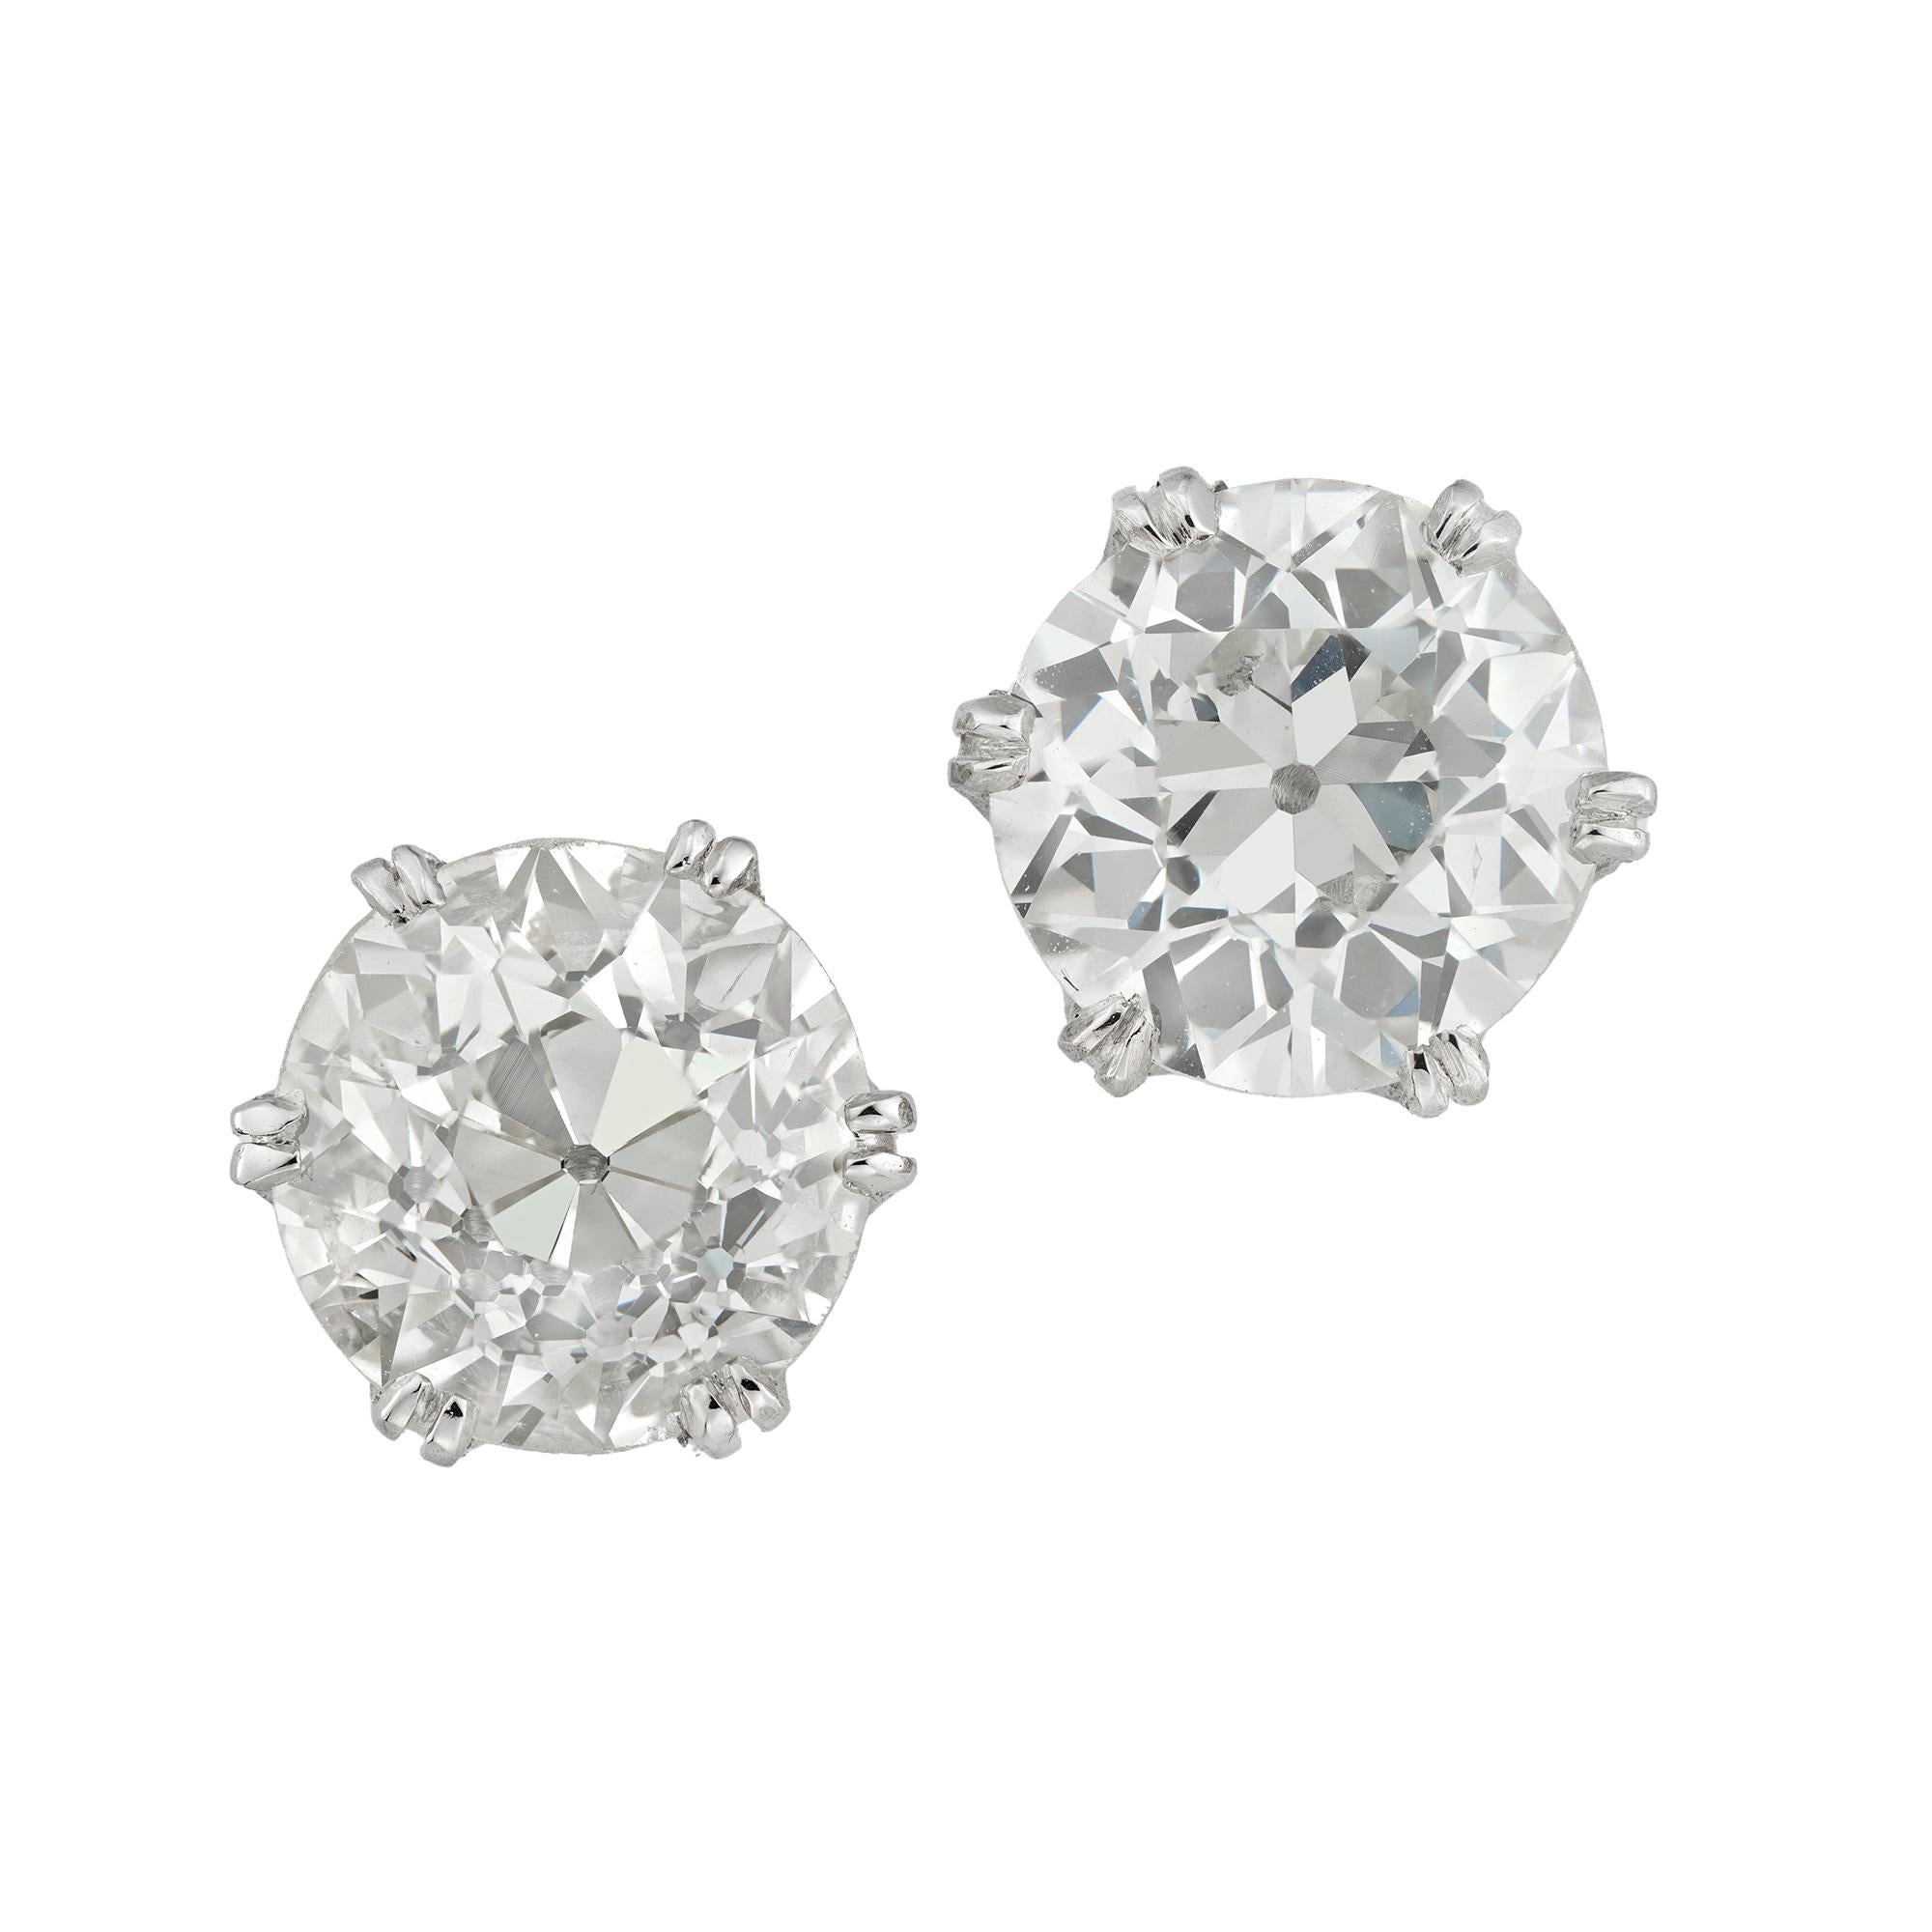 A pair of old-cut diamond stud earrings, the one old European-cut diamond weighing 1.71 carats of M colour and VS2 clarity, accompanied by GCS report, the other weighing 1.52 carats of K colour and SI1 clarity, accompanied by De Beers report, each